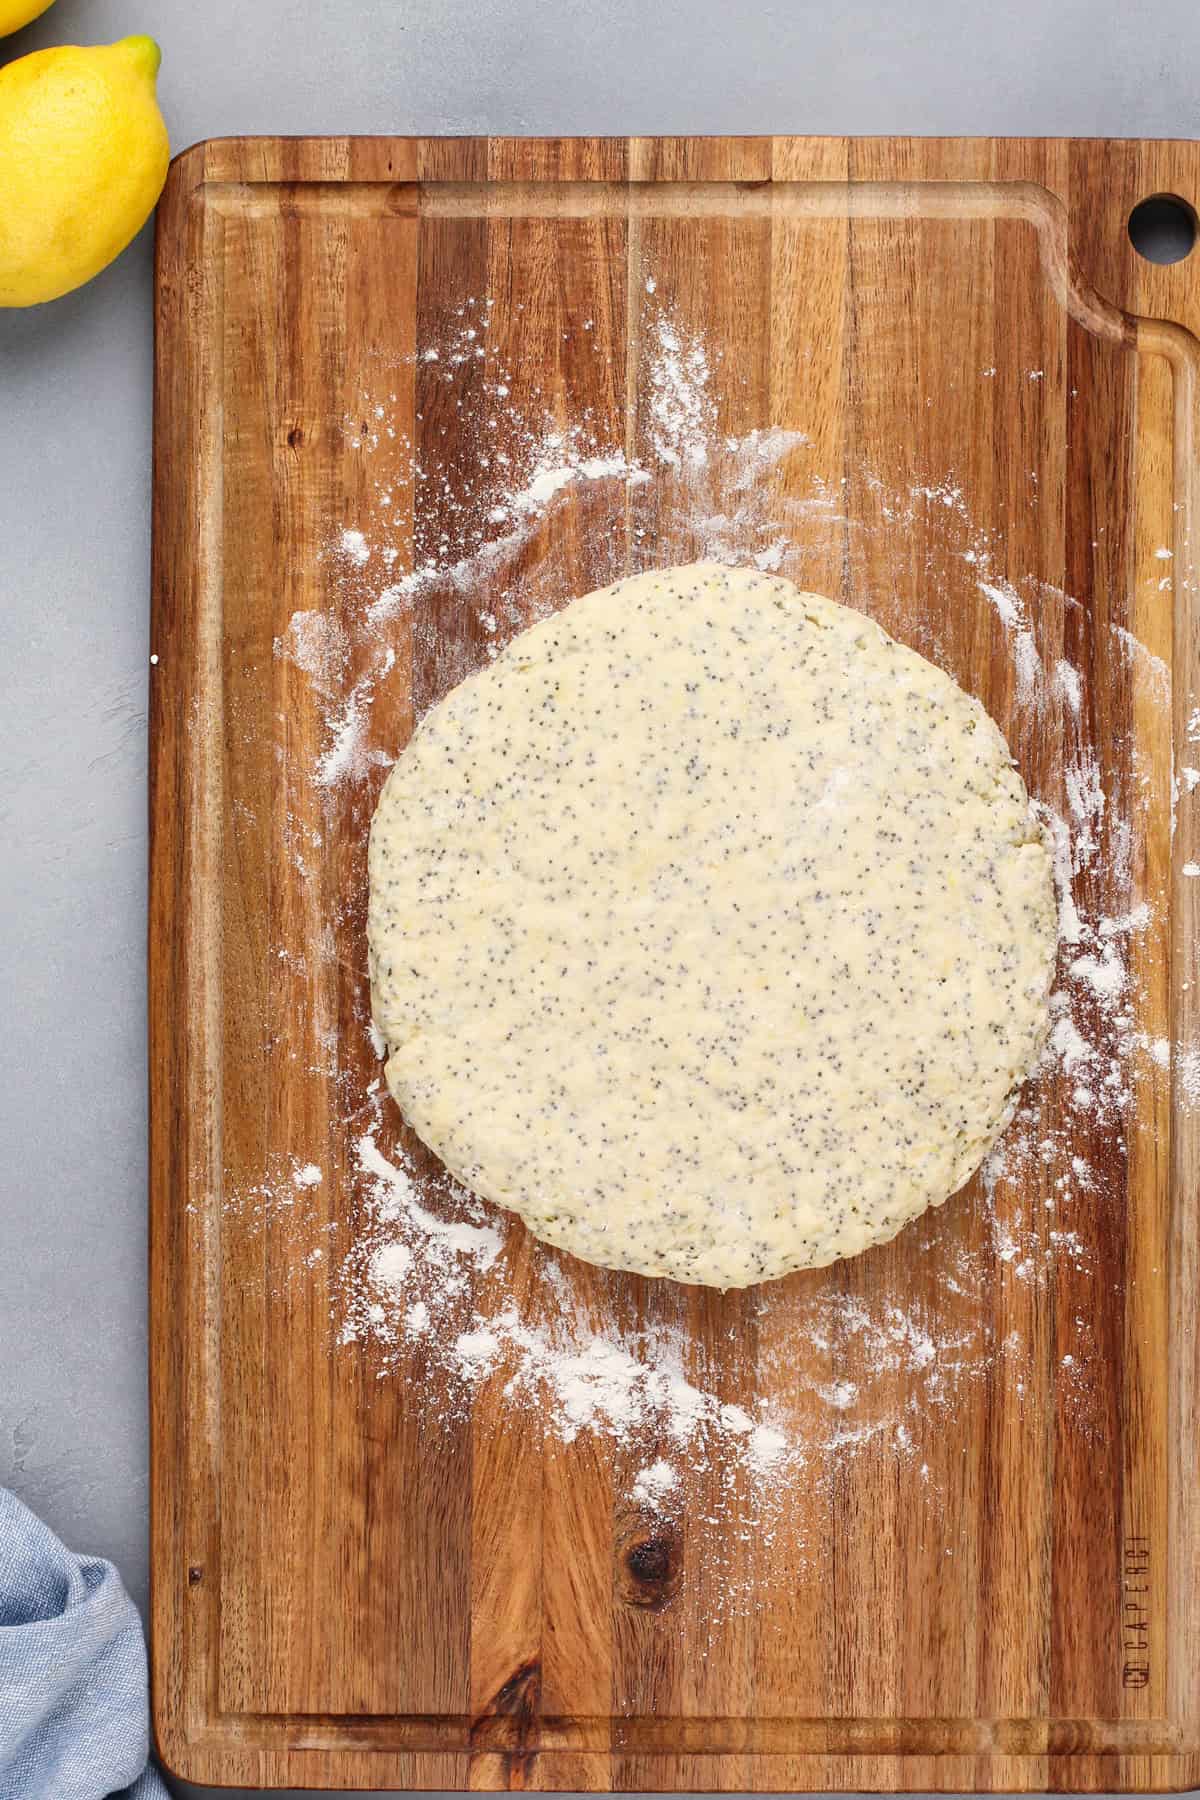 Lemon poppy seed scone dough shaped into a disk on a floured cutting board.